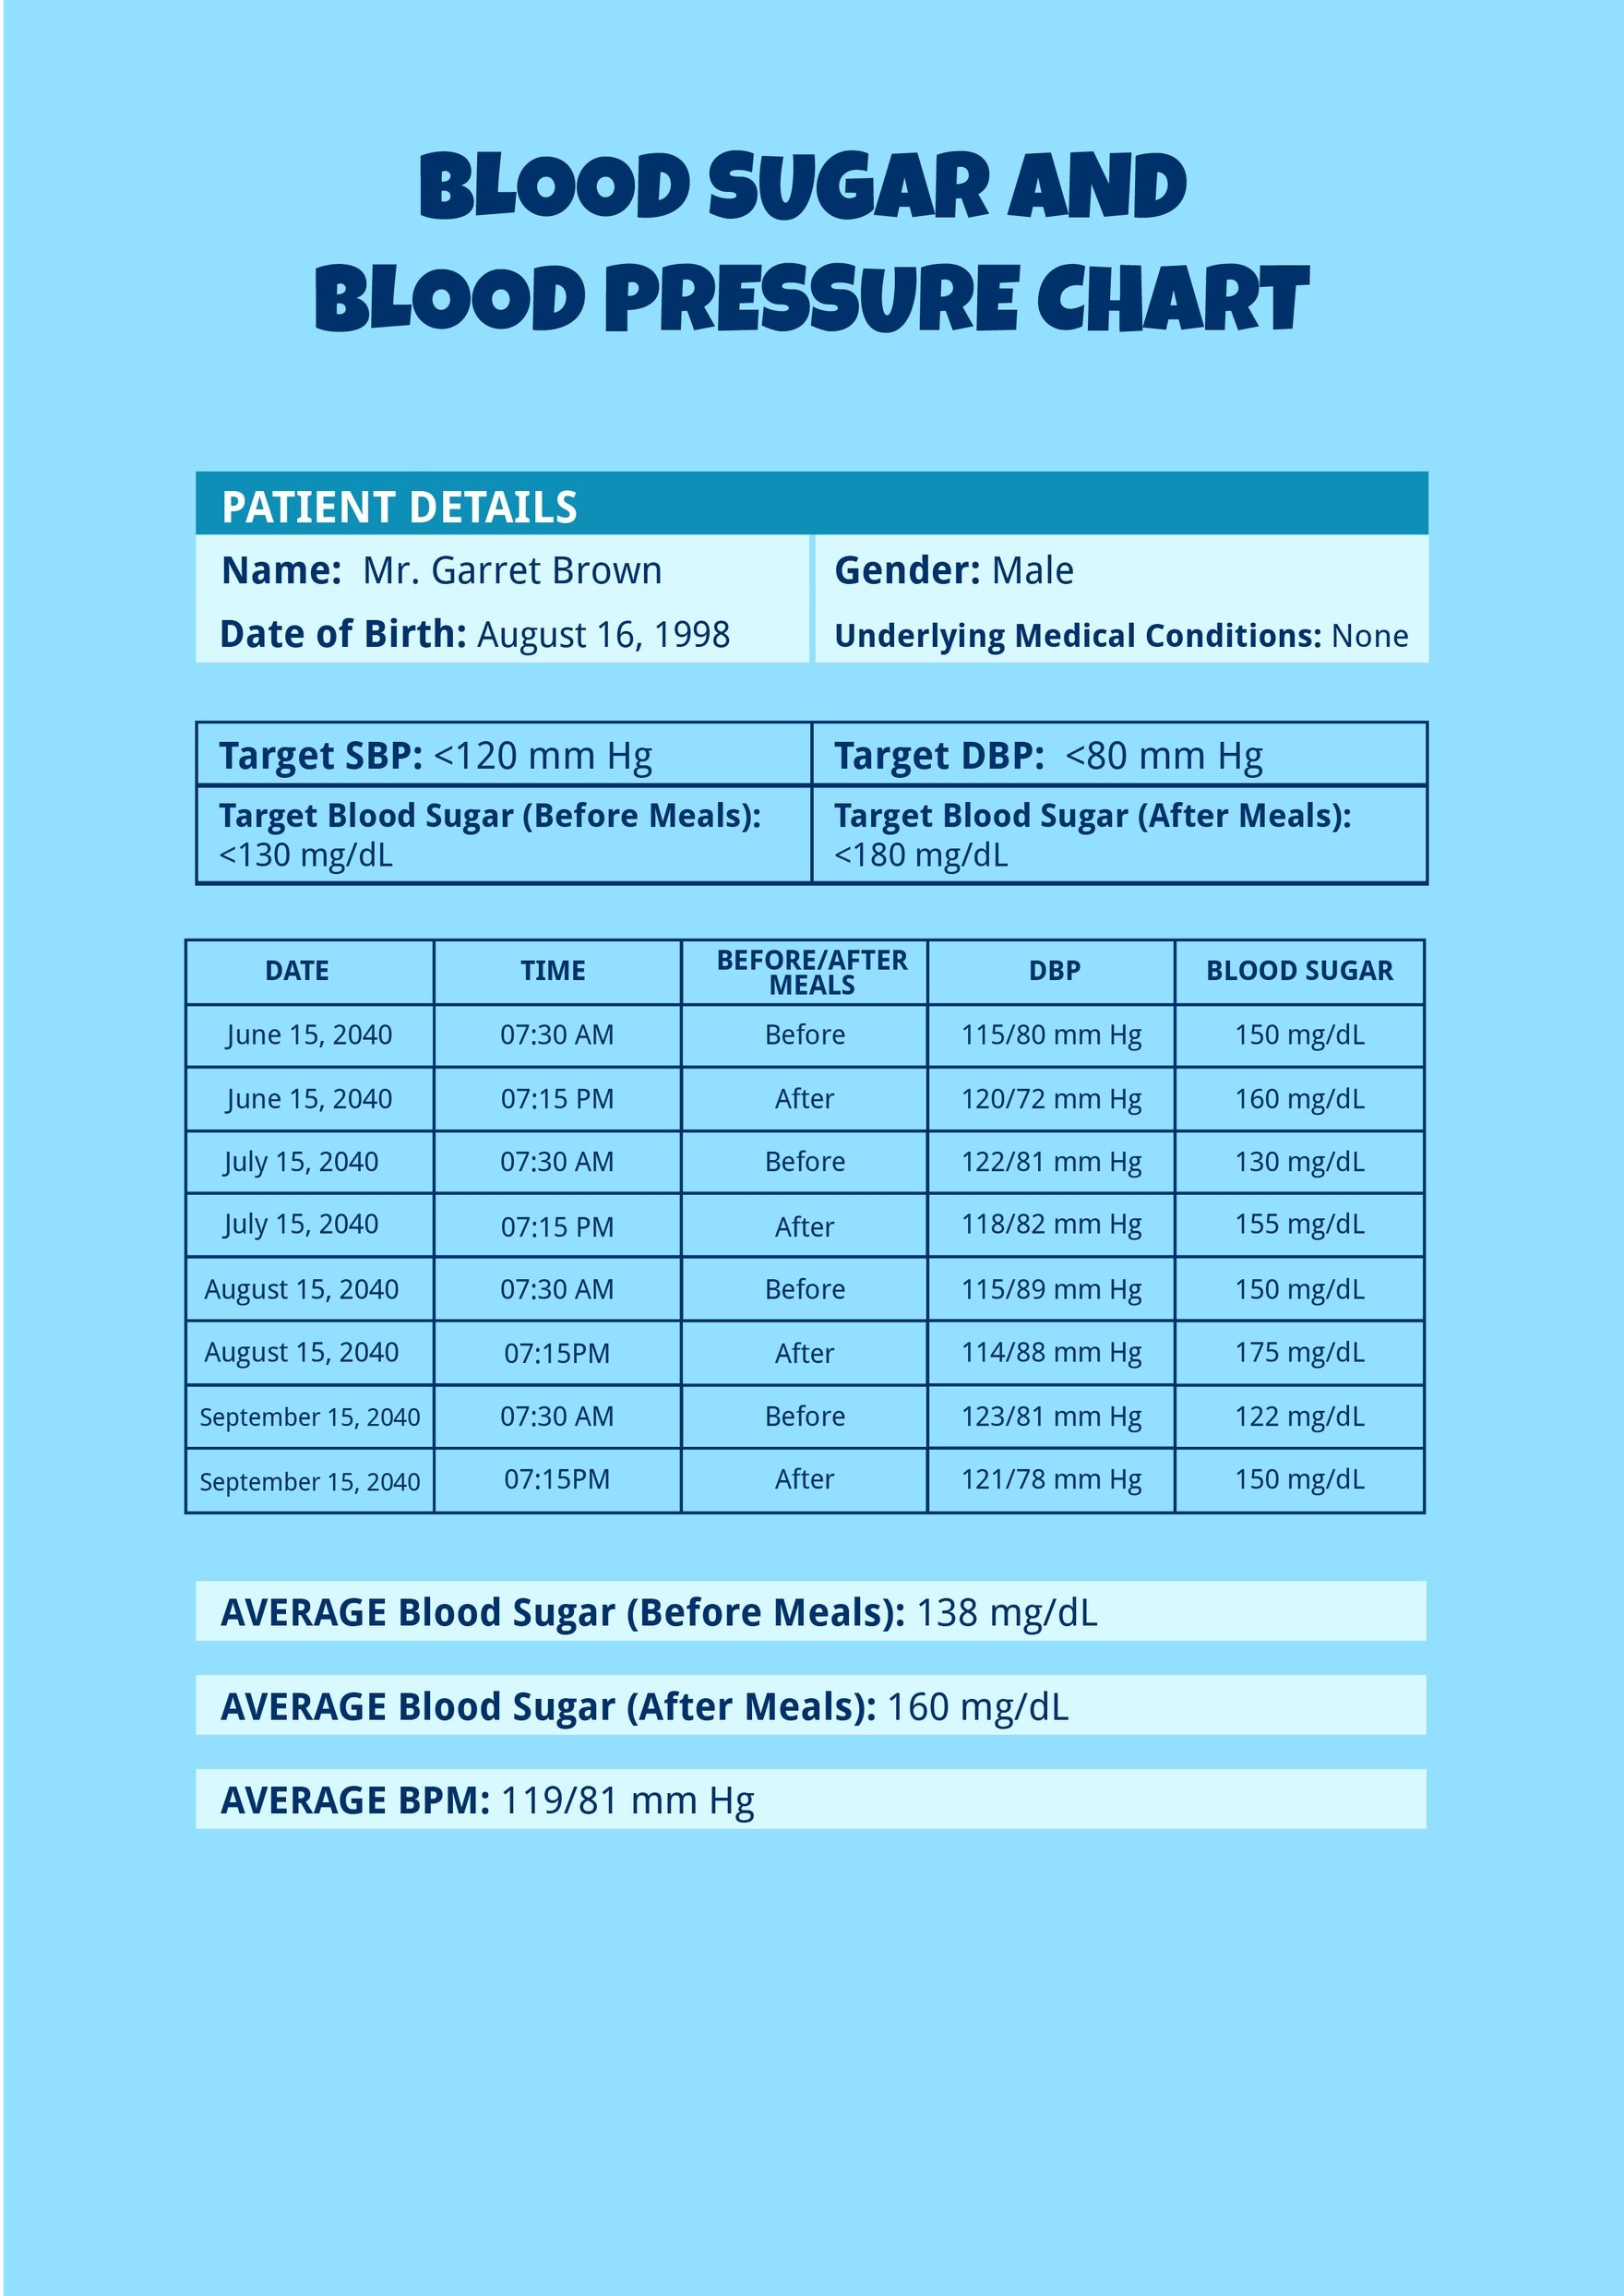 Blood Sugar and Blood Pressure Chart Template